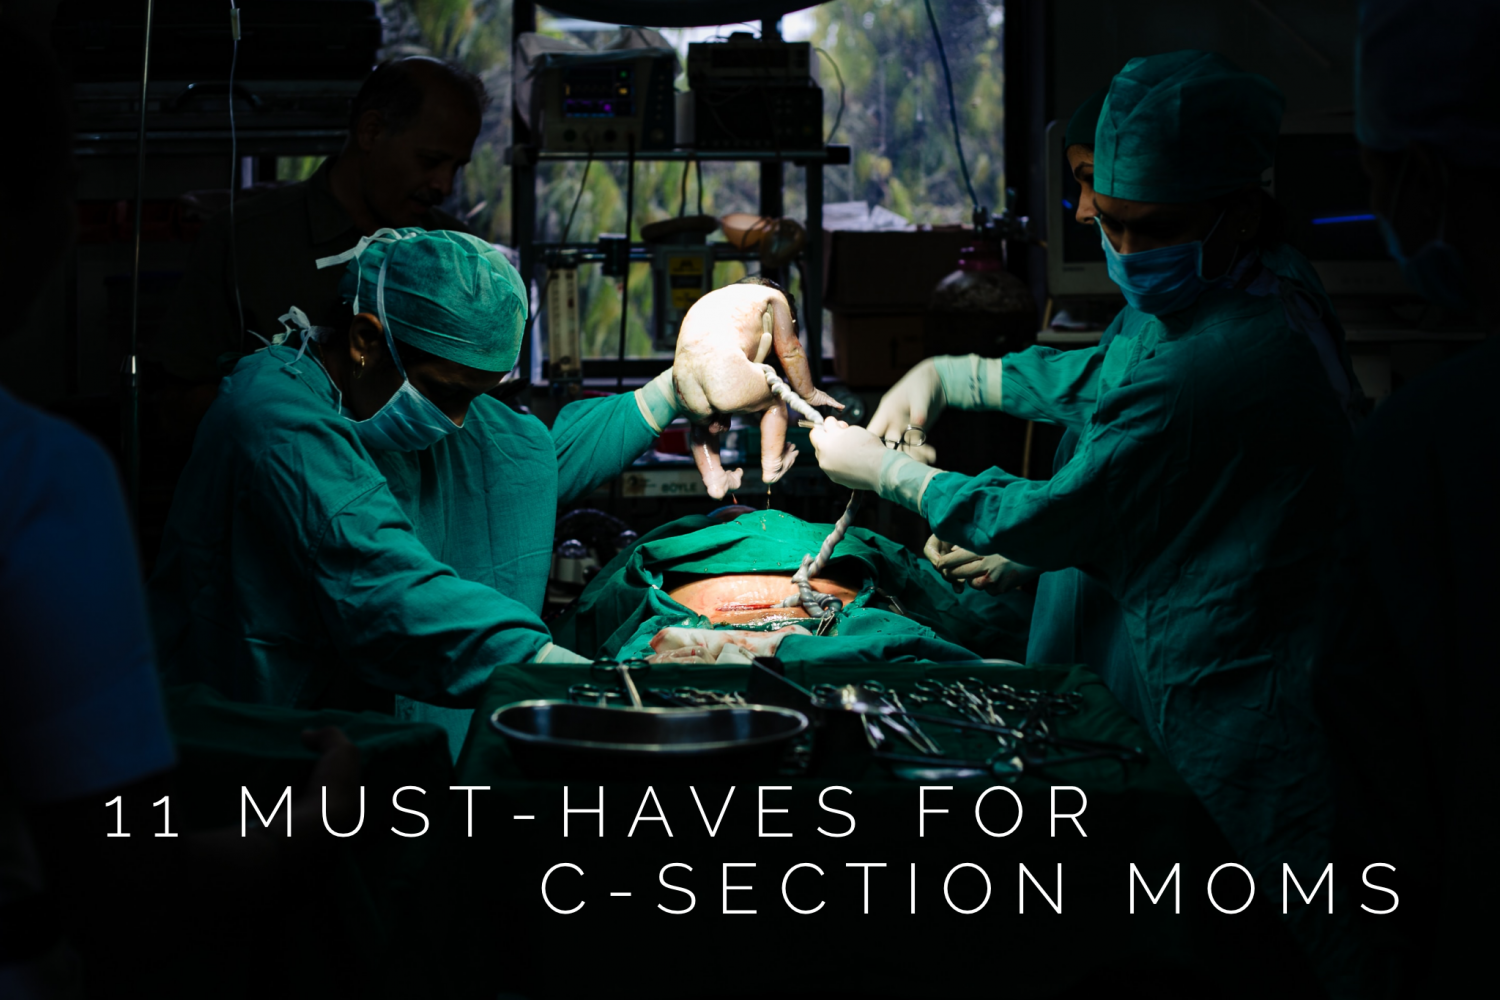 11 Must-Haves for C-Section Moms